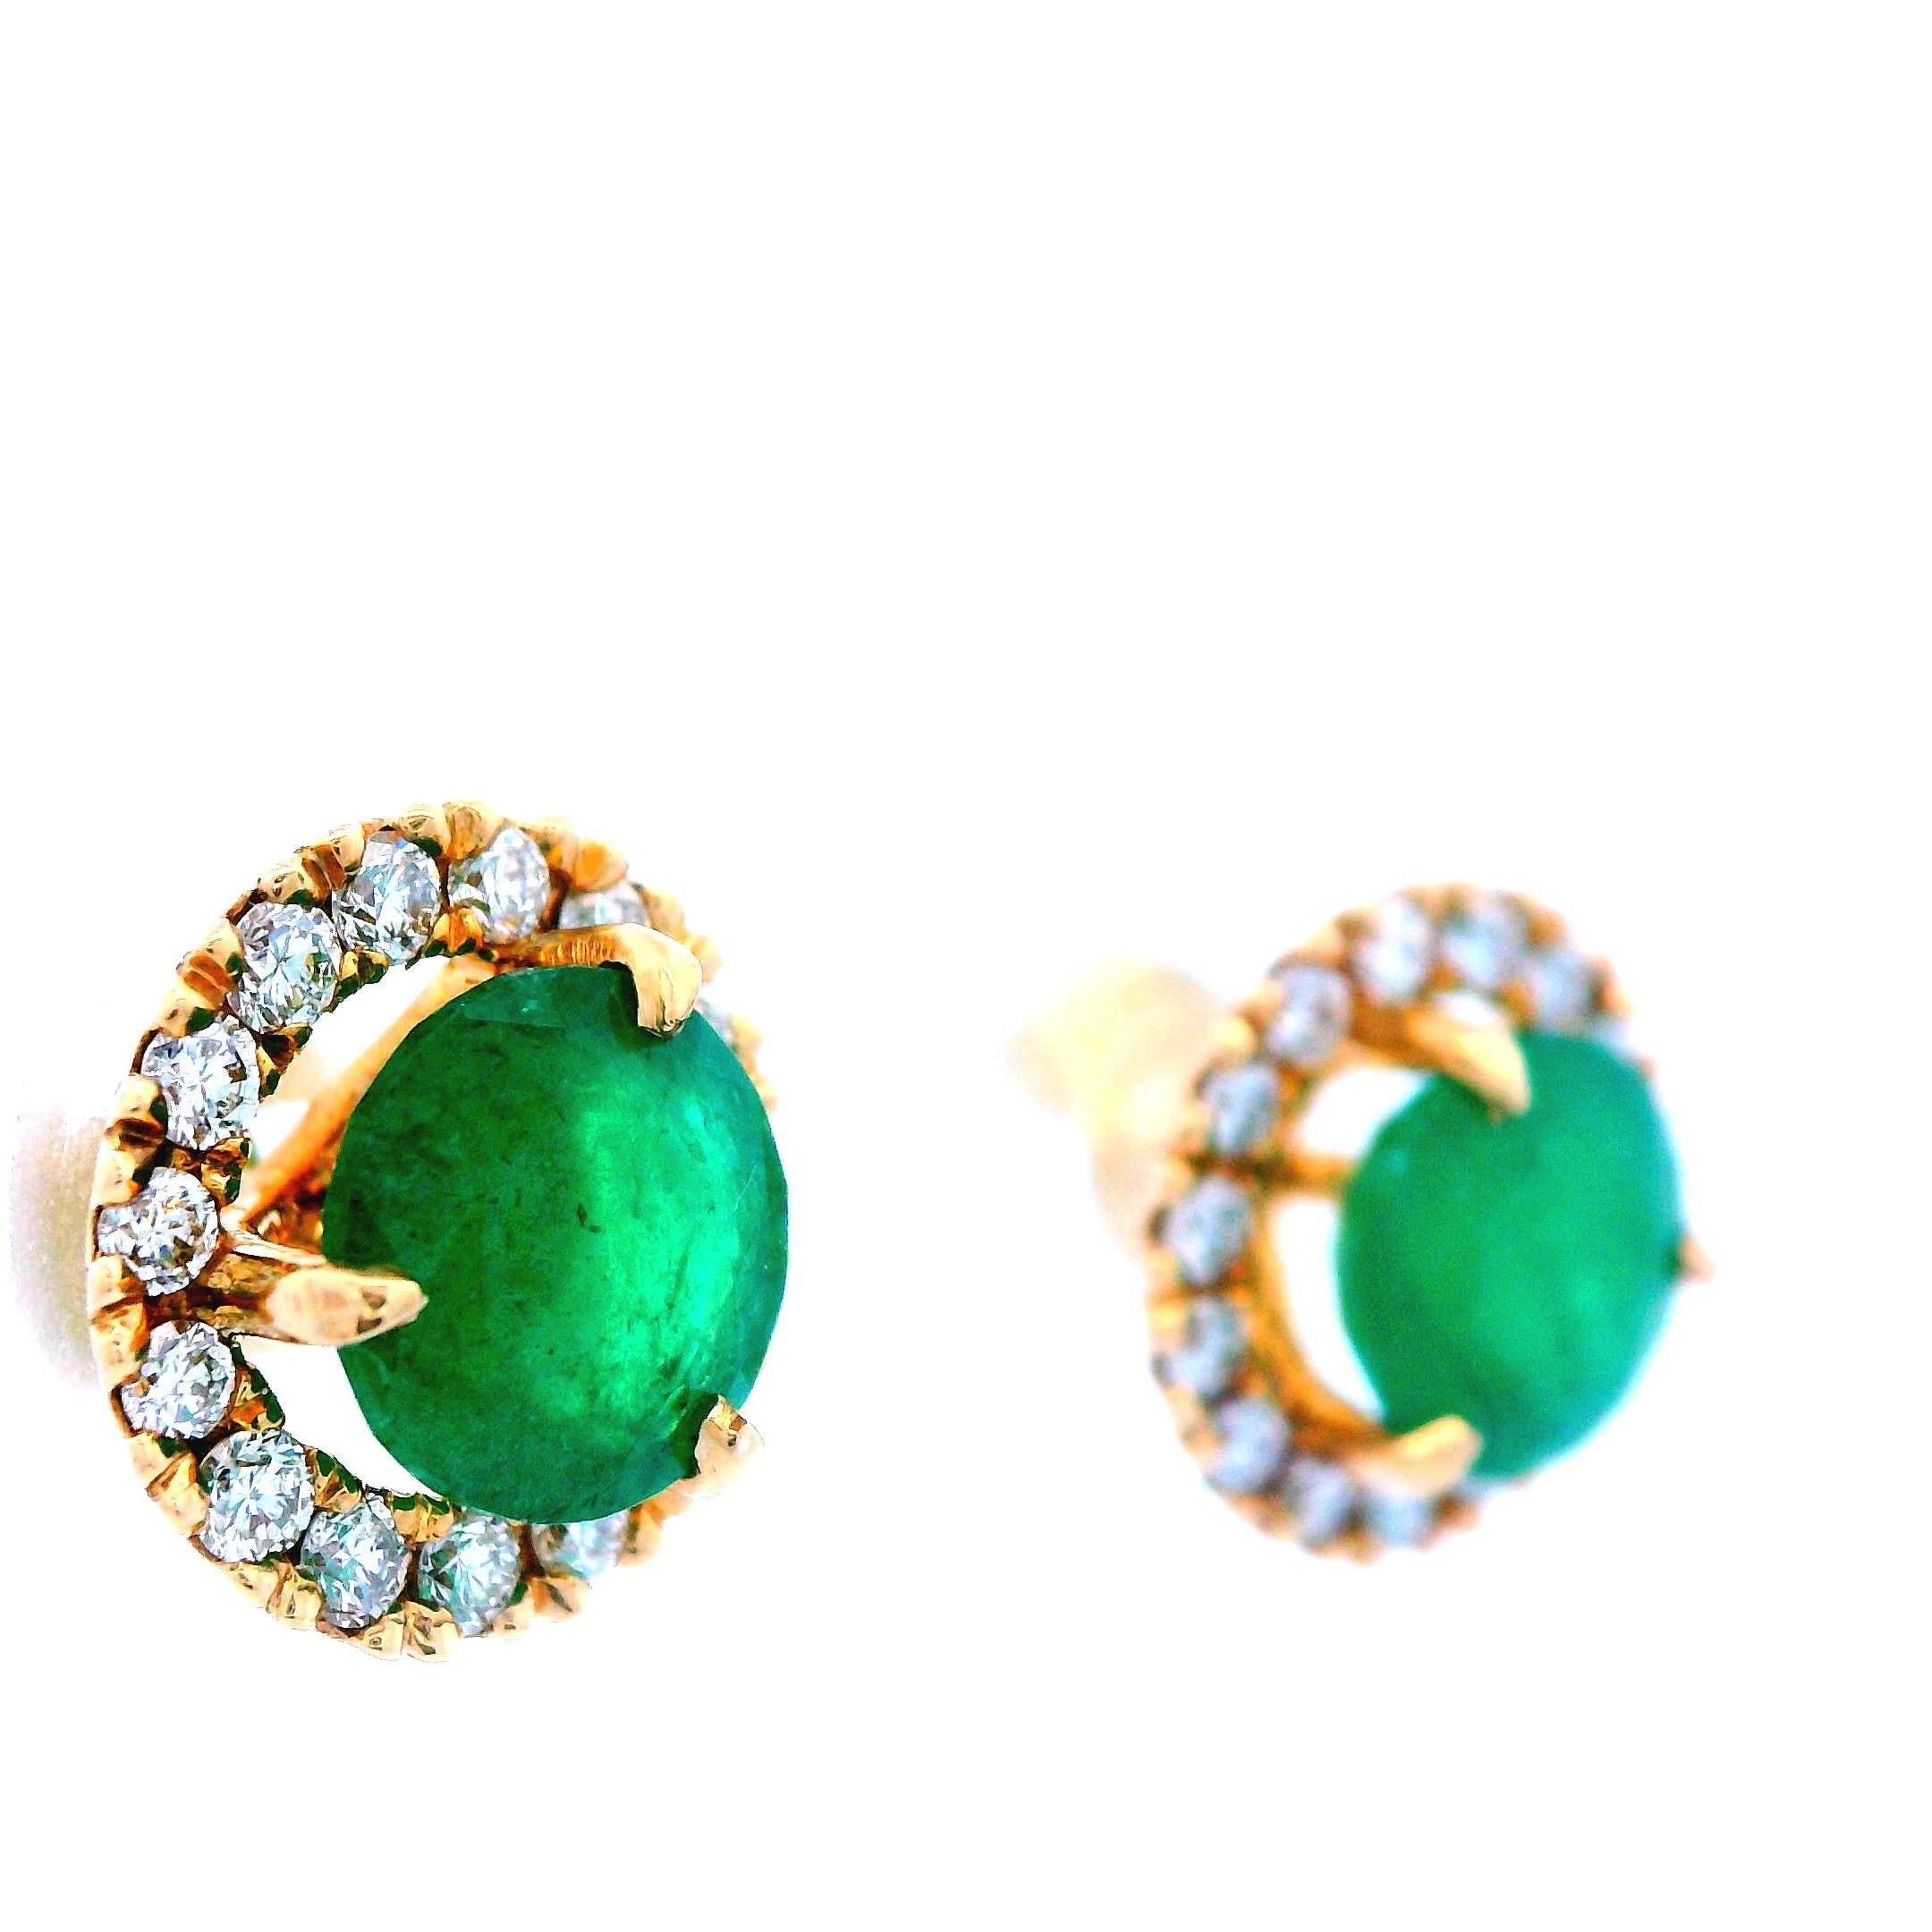 These contemporary 14k yellow gold halo earrings with diamond and emerald are stunning. The photos and videos do these earrings no justice. These earrings feature floating, round cut, emerald centers stones that are surrounded by a halo of 14k